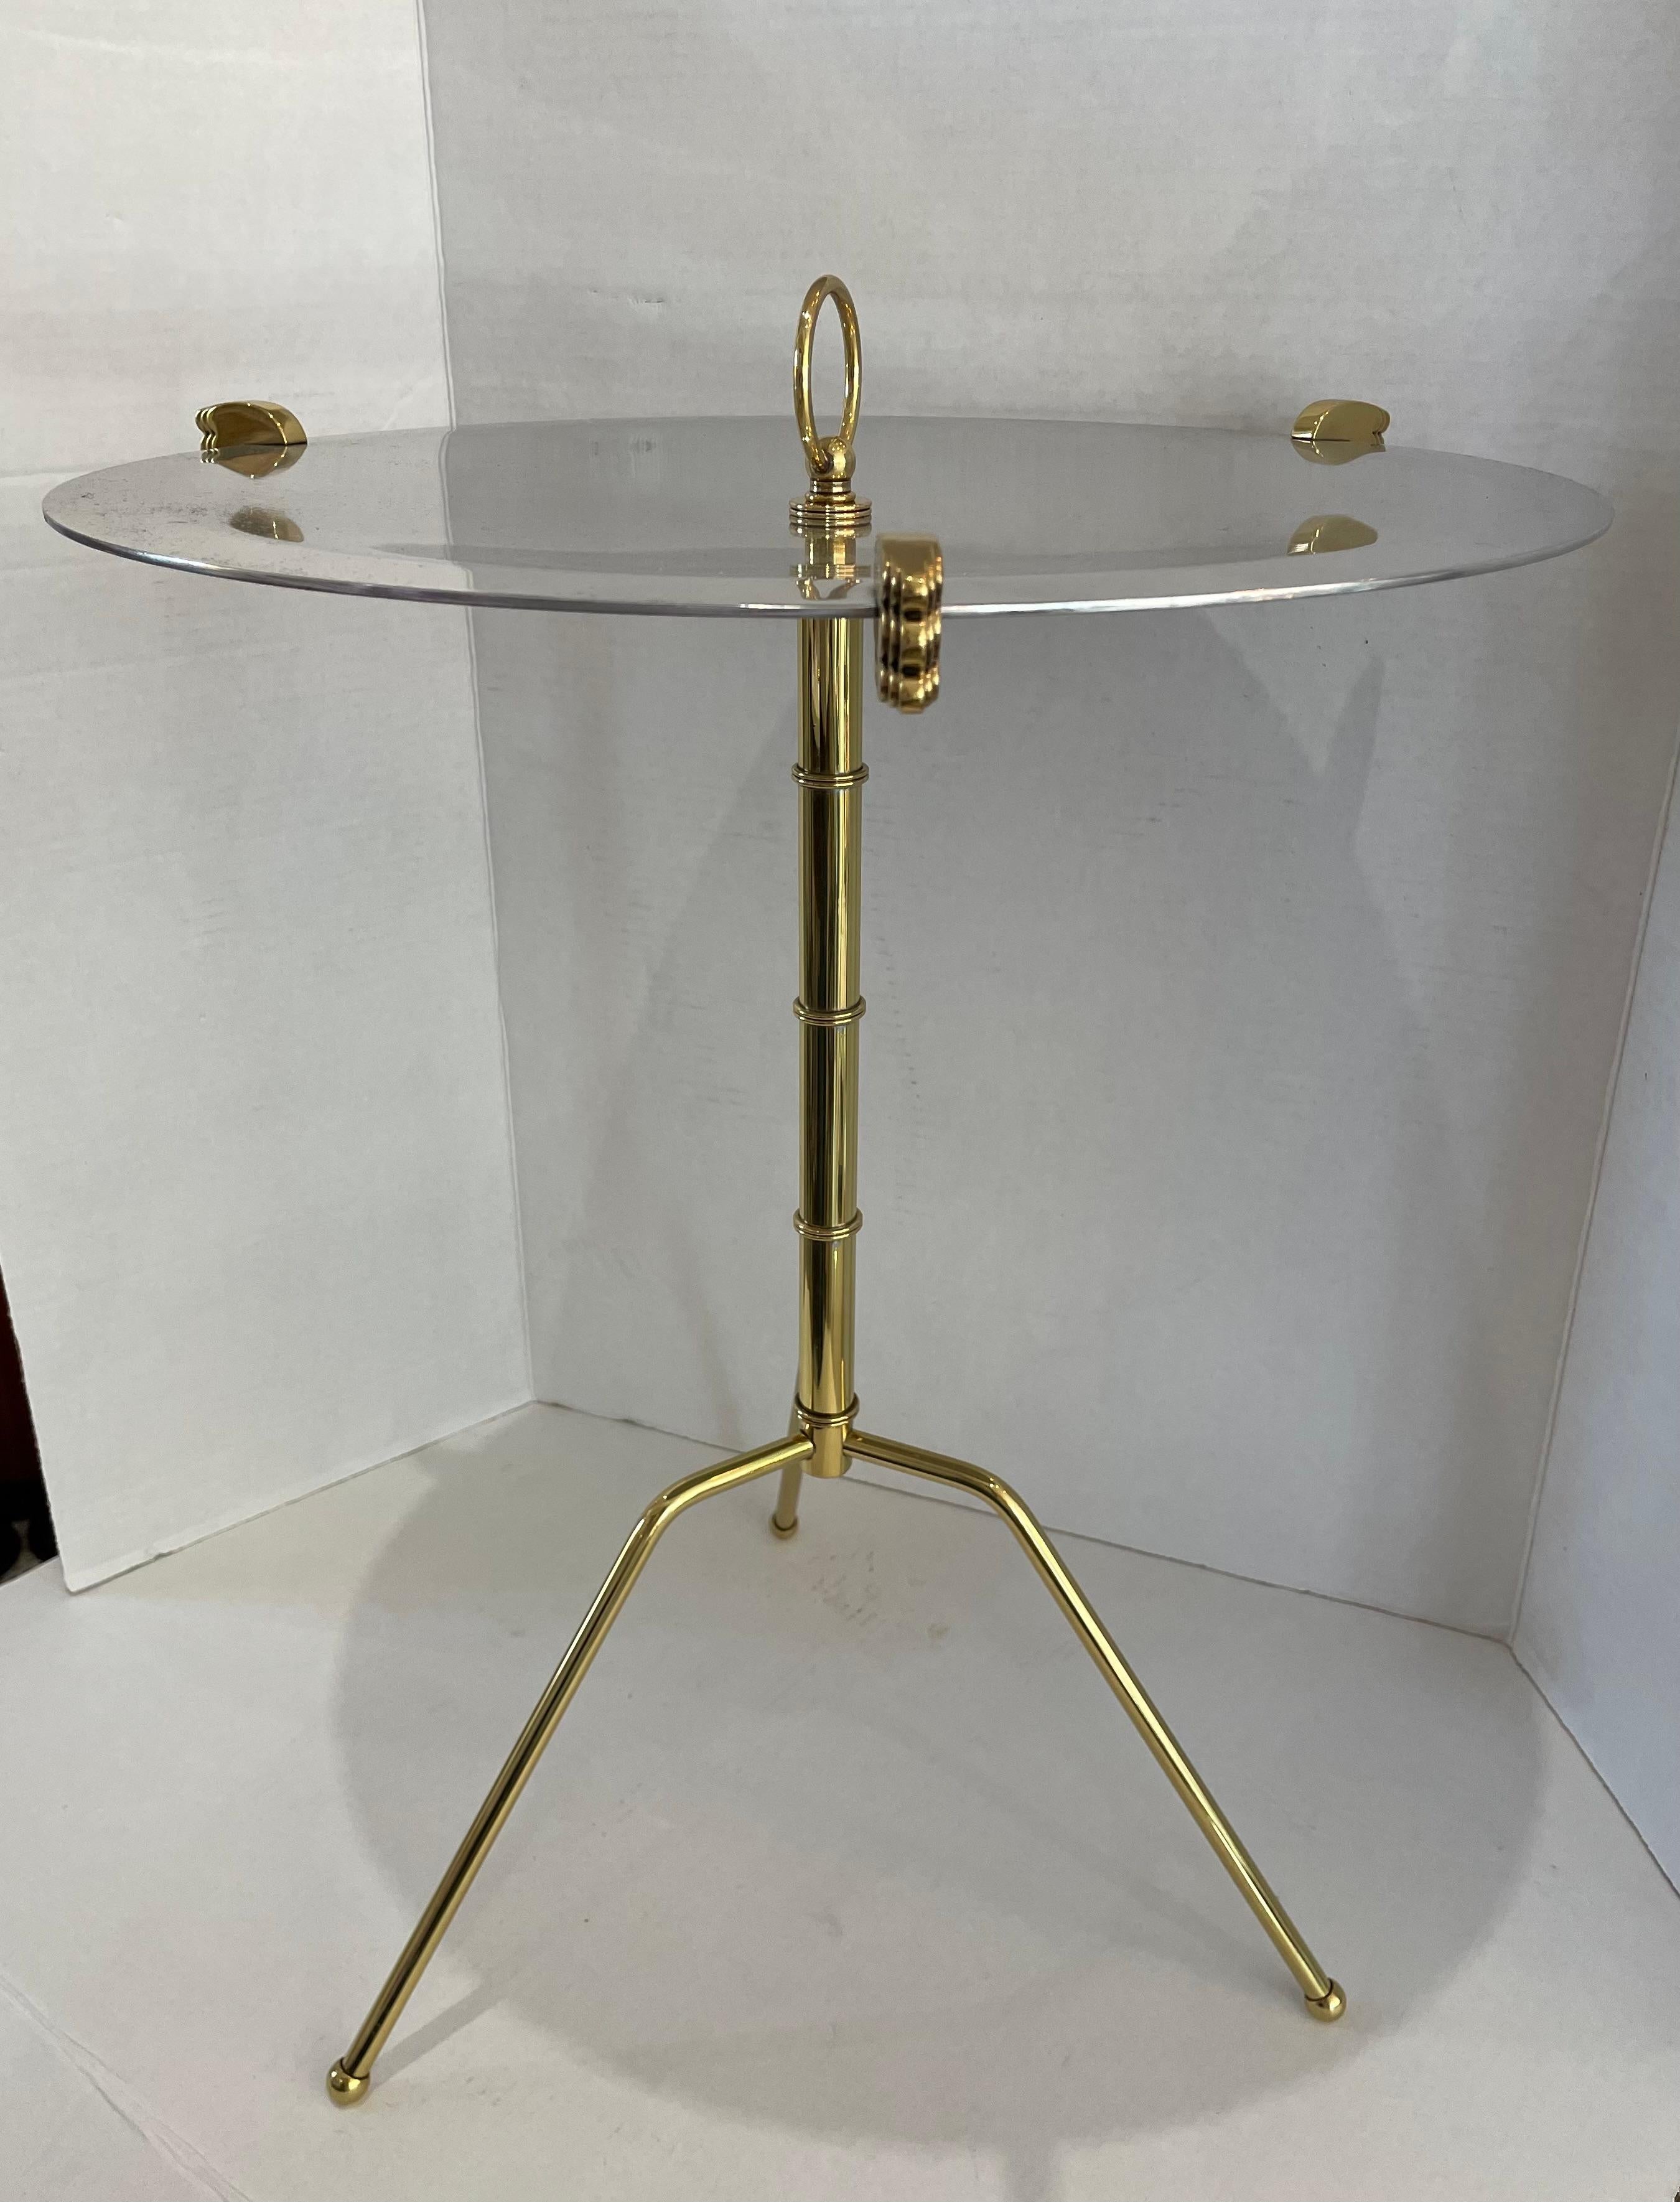 Kennsington Ware Art Deco Table  In Good Condition For Sale In West Palm Beach, FL